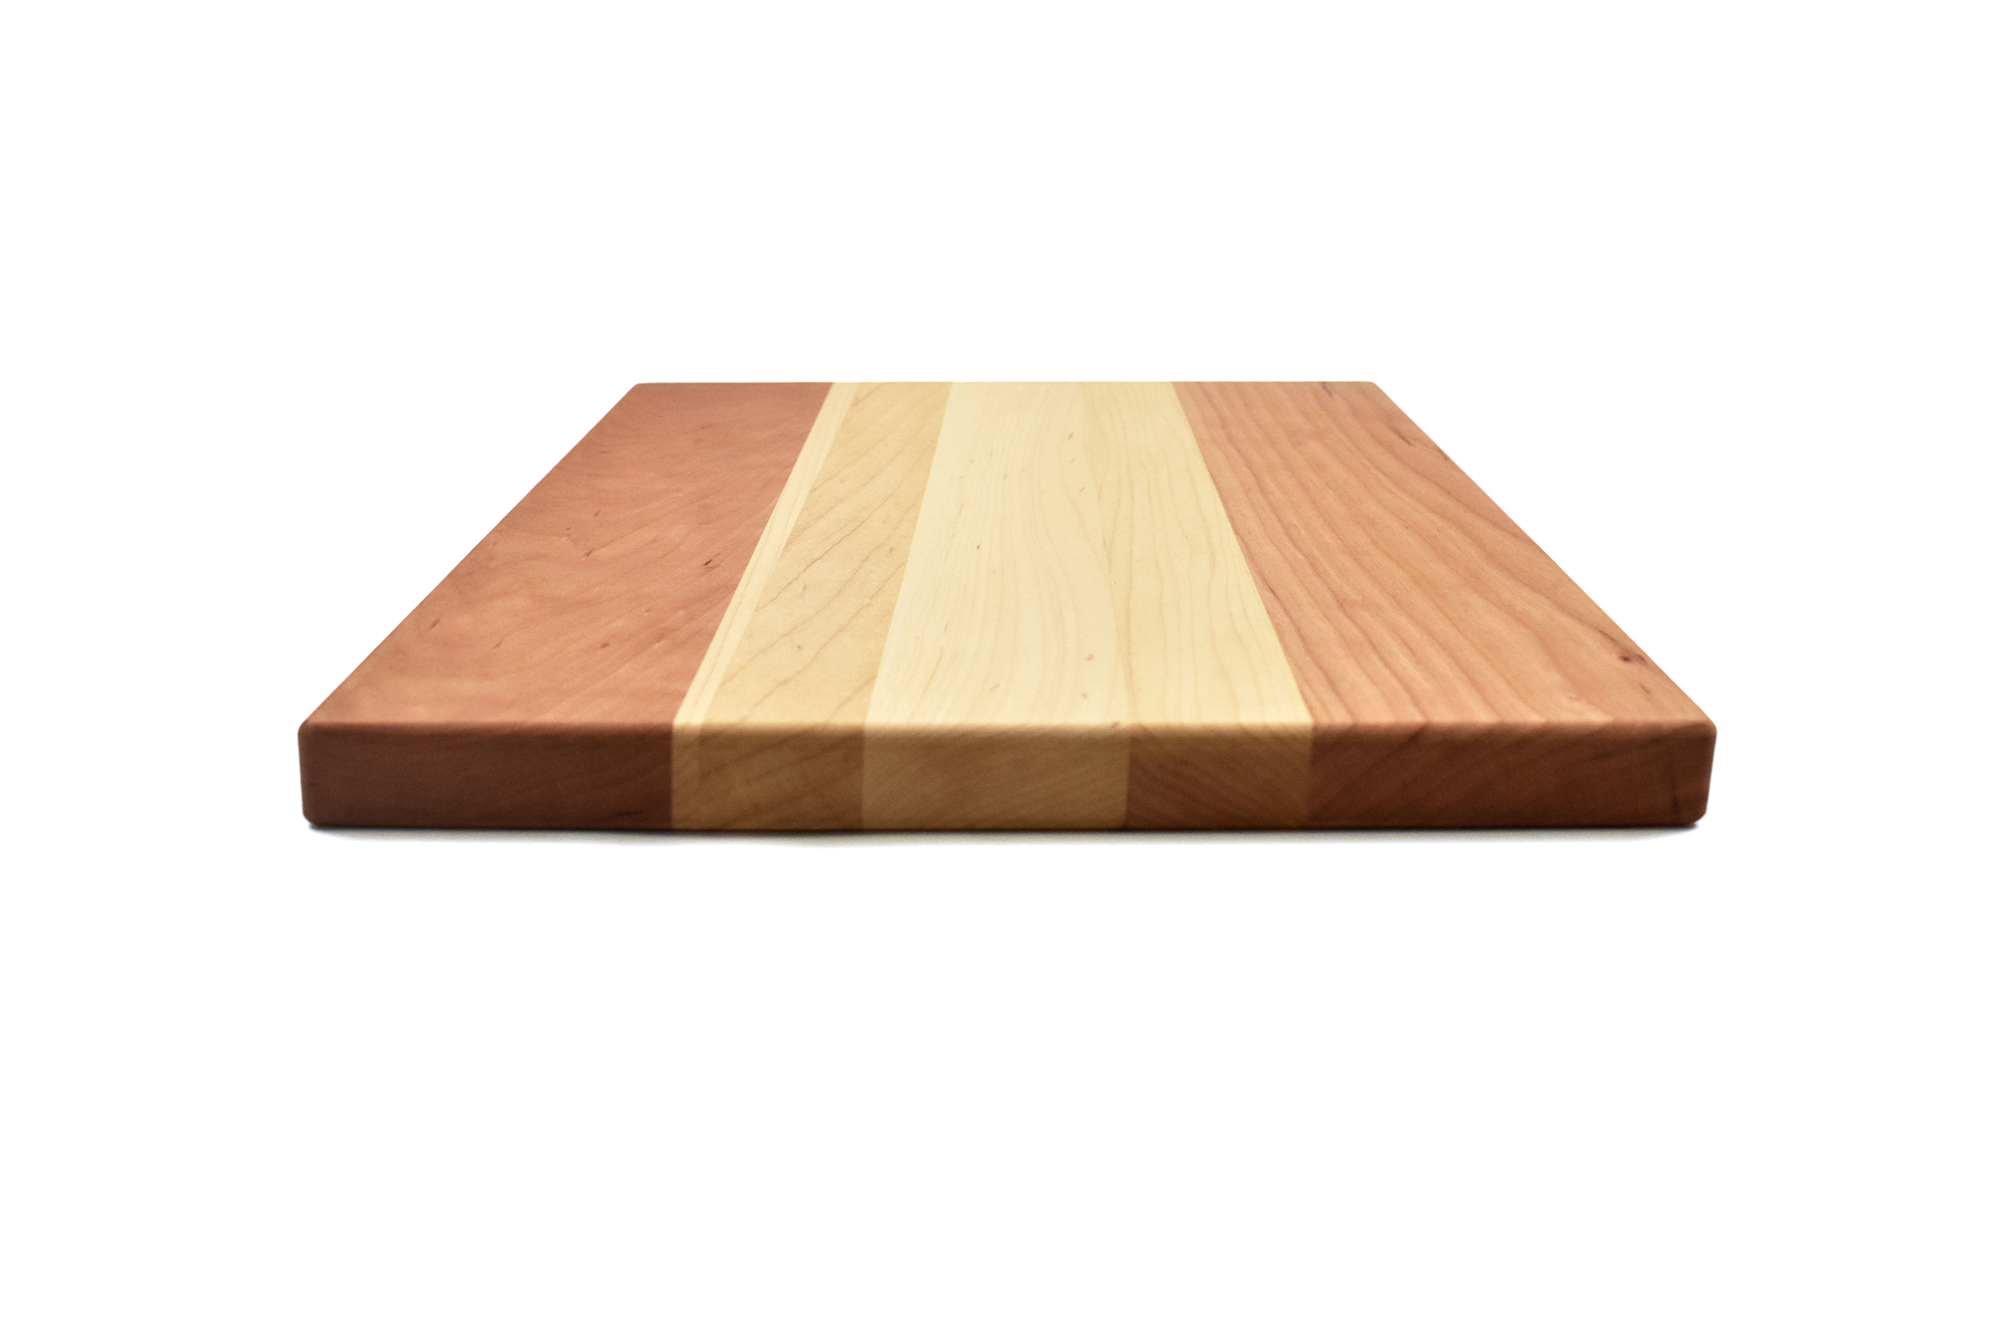 Multi wood species cutting board - Cherry wood ends with Maple wood in the middle